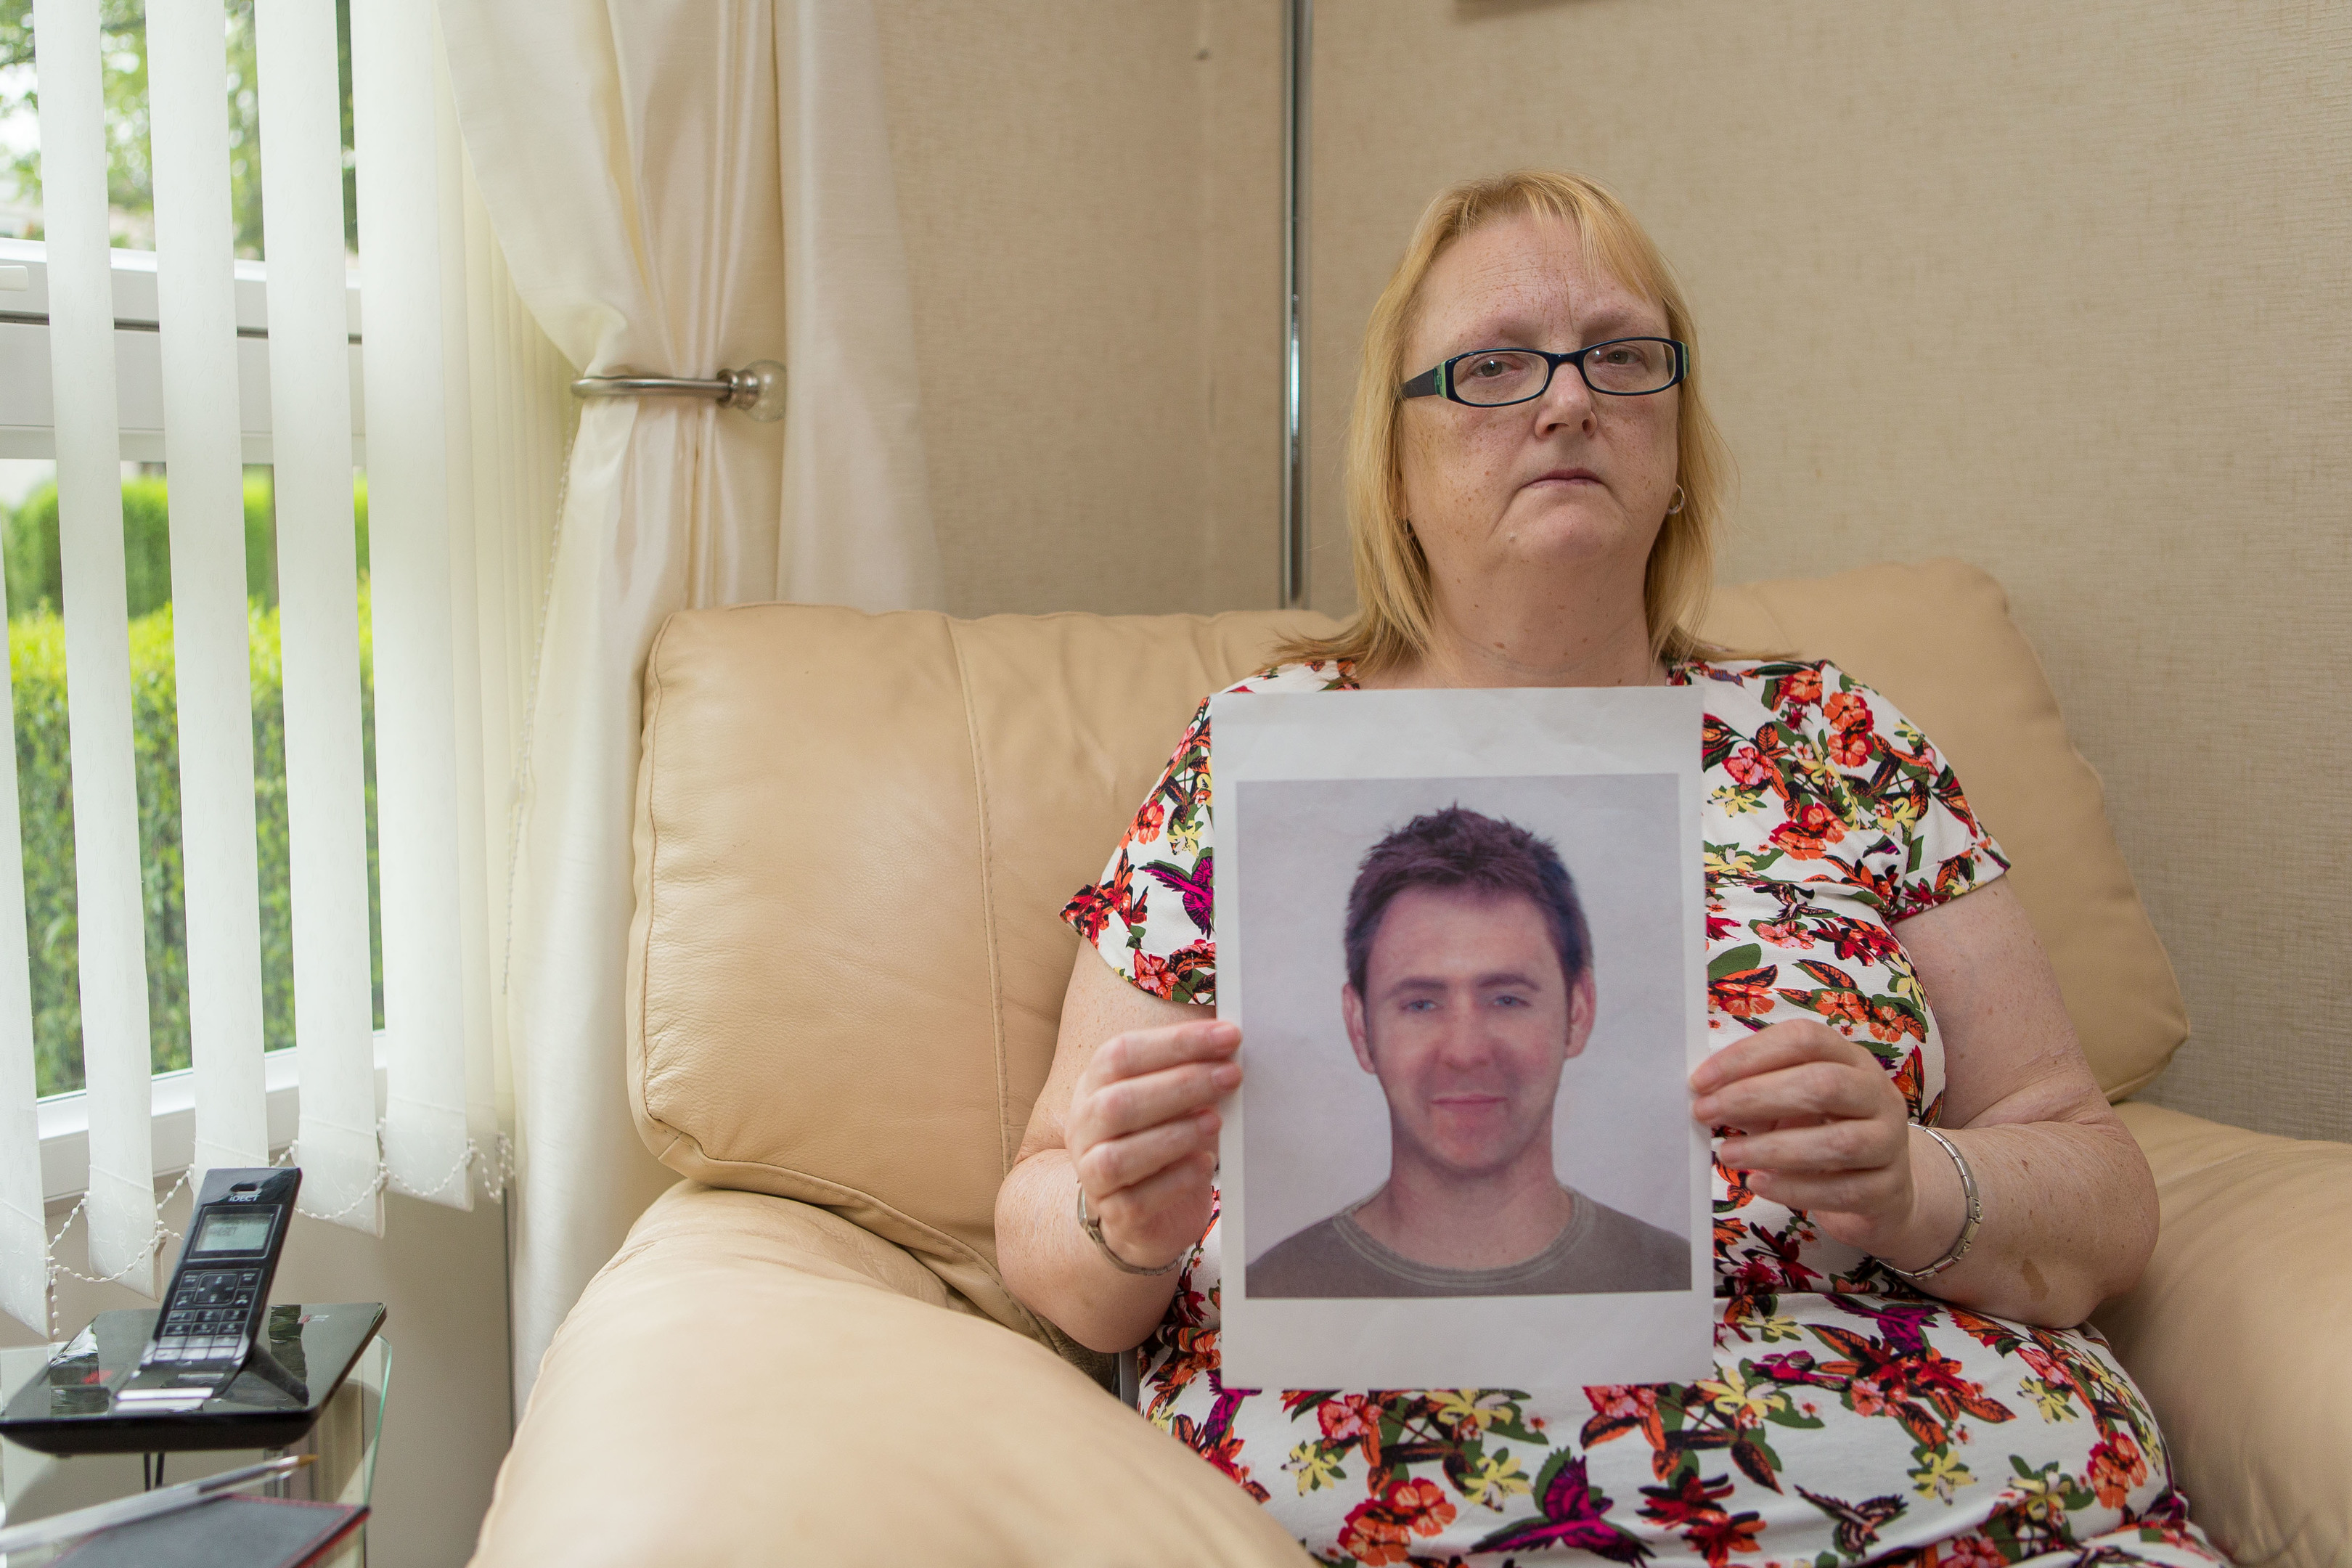 Missing person Kenneth Jones is shown in a Police E-Fit held by his long suffering mother MaryAnne Jones.